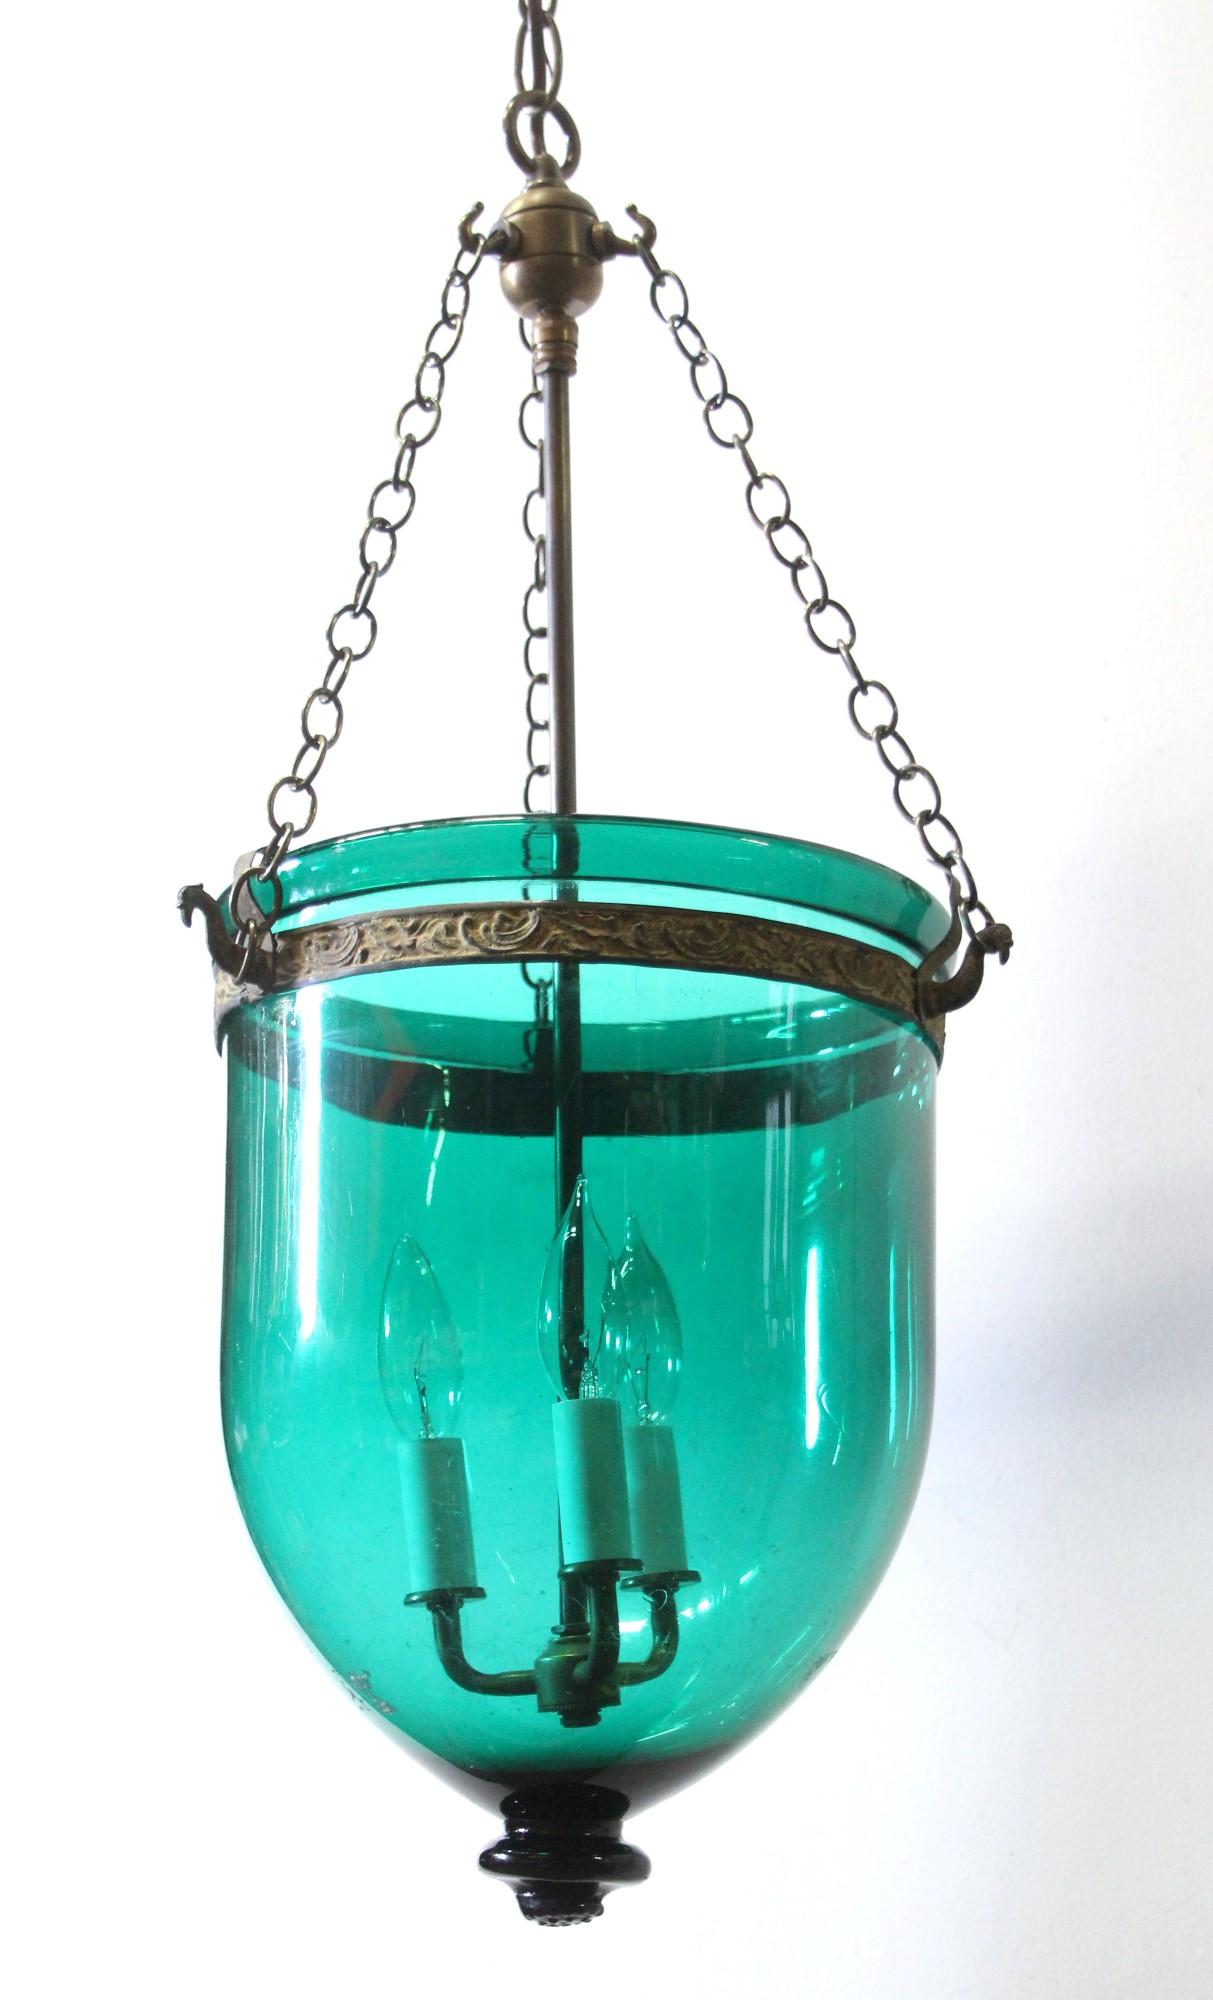 Early 20th century greenish blue hand made bell jar pendant light. Rewired with three new candelabra lights and new brass hardware. This can be seen at our 400 Gilligan St location in Scranton, PA.